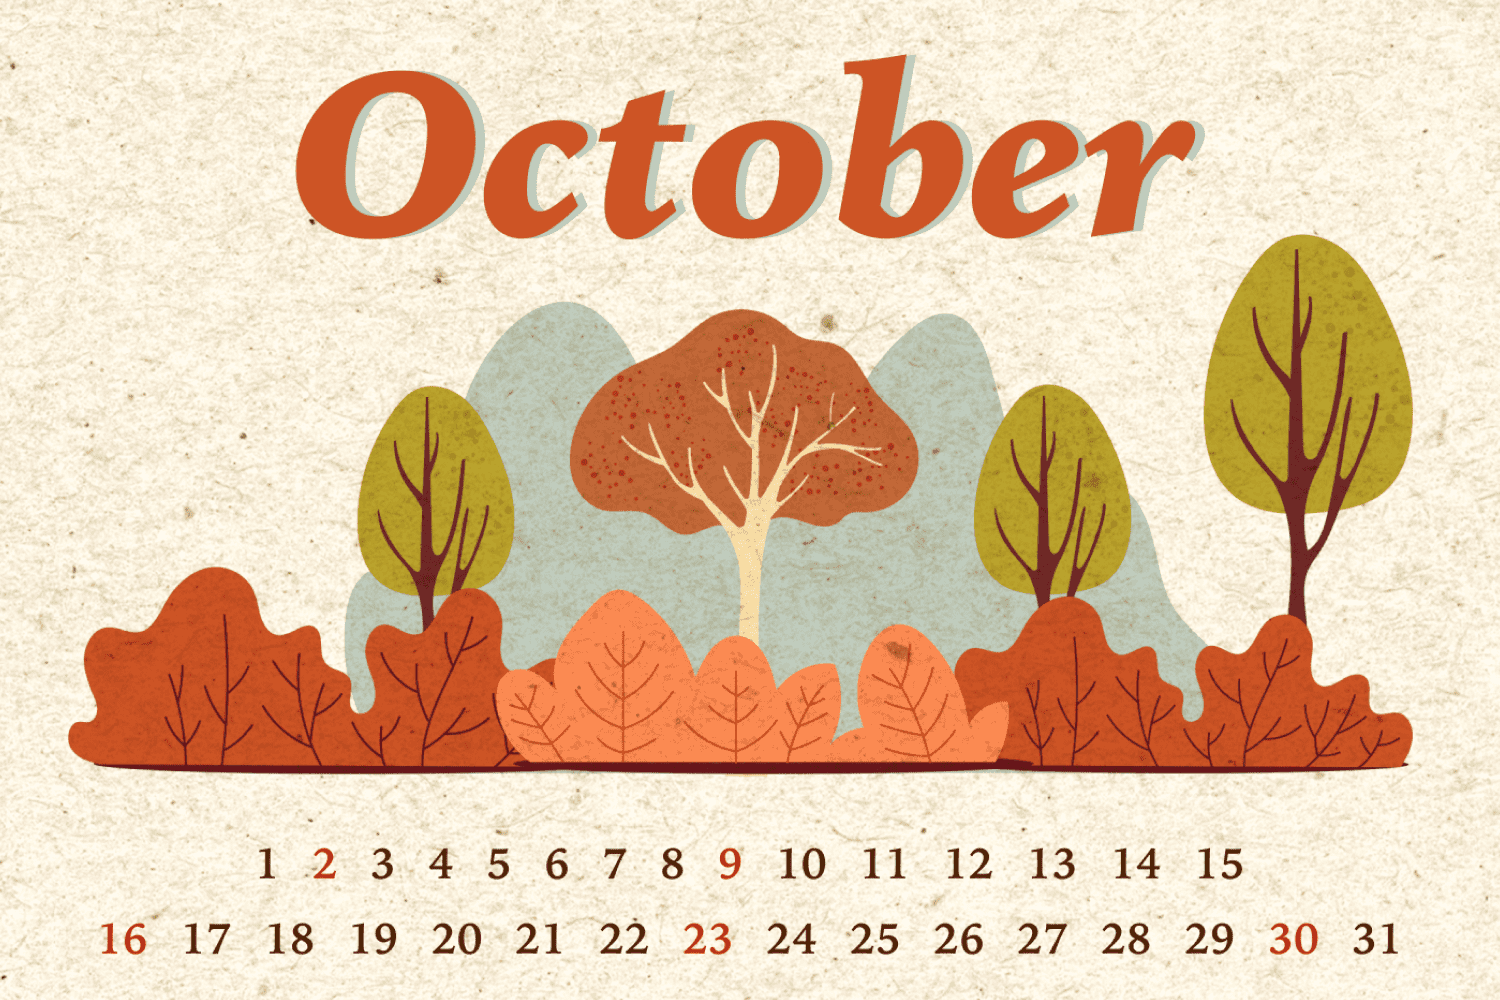 October calendar with painted autumn forest.